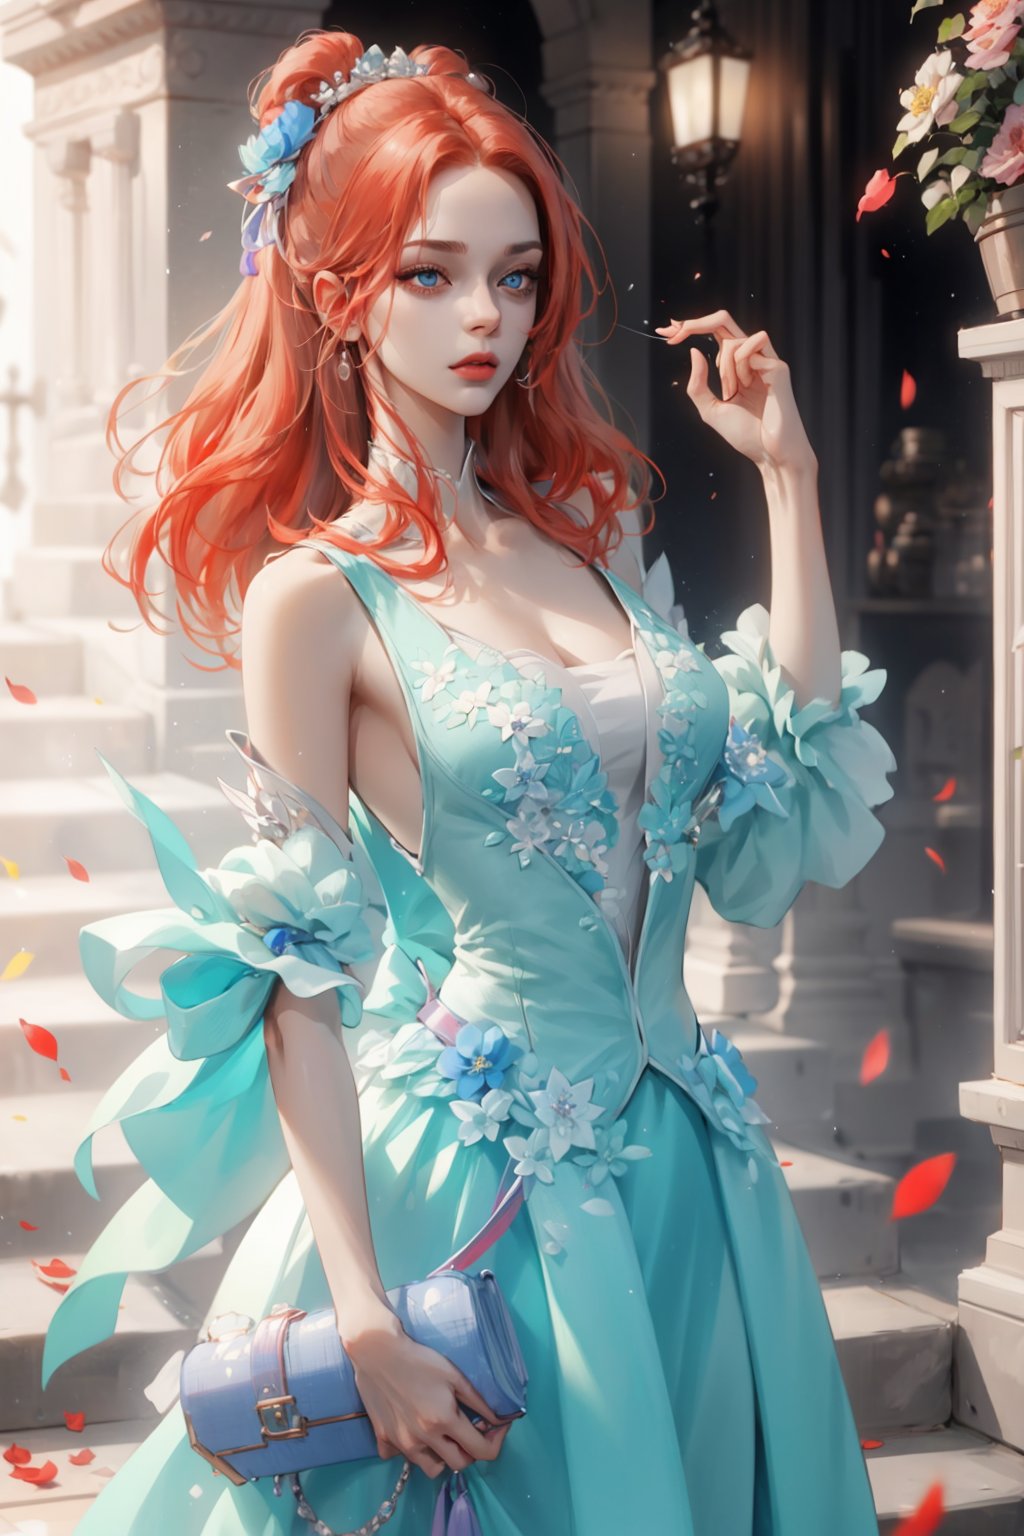 (asterpiece:1.2, best quality), (Soft light), (shiny skin), 1people,  ginger_hair, hateful look, ball party, ball room, ballgown, eye_lashes, collarbone, victorian, blue eyes, red_long_ hair_girl, crowed, ball party, dancing, standing, holding campaigne, flowers petals,weiboZH,hll